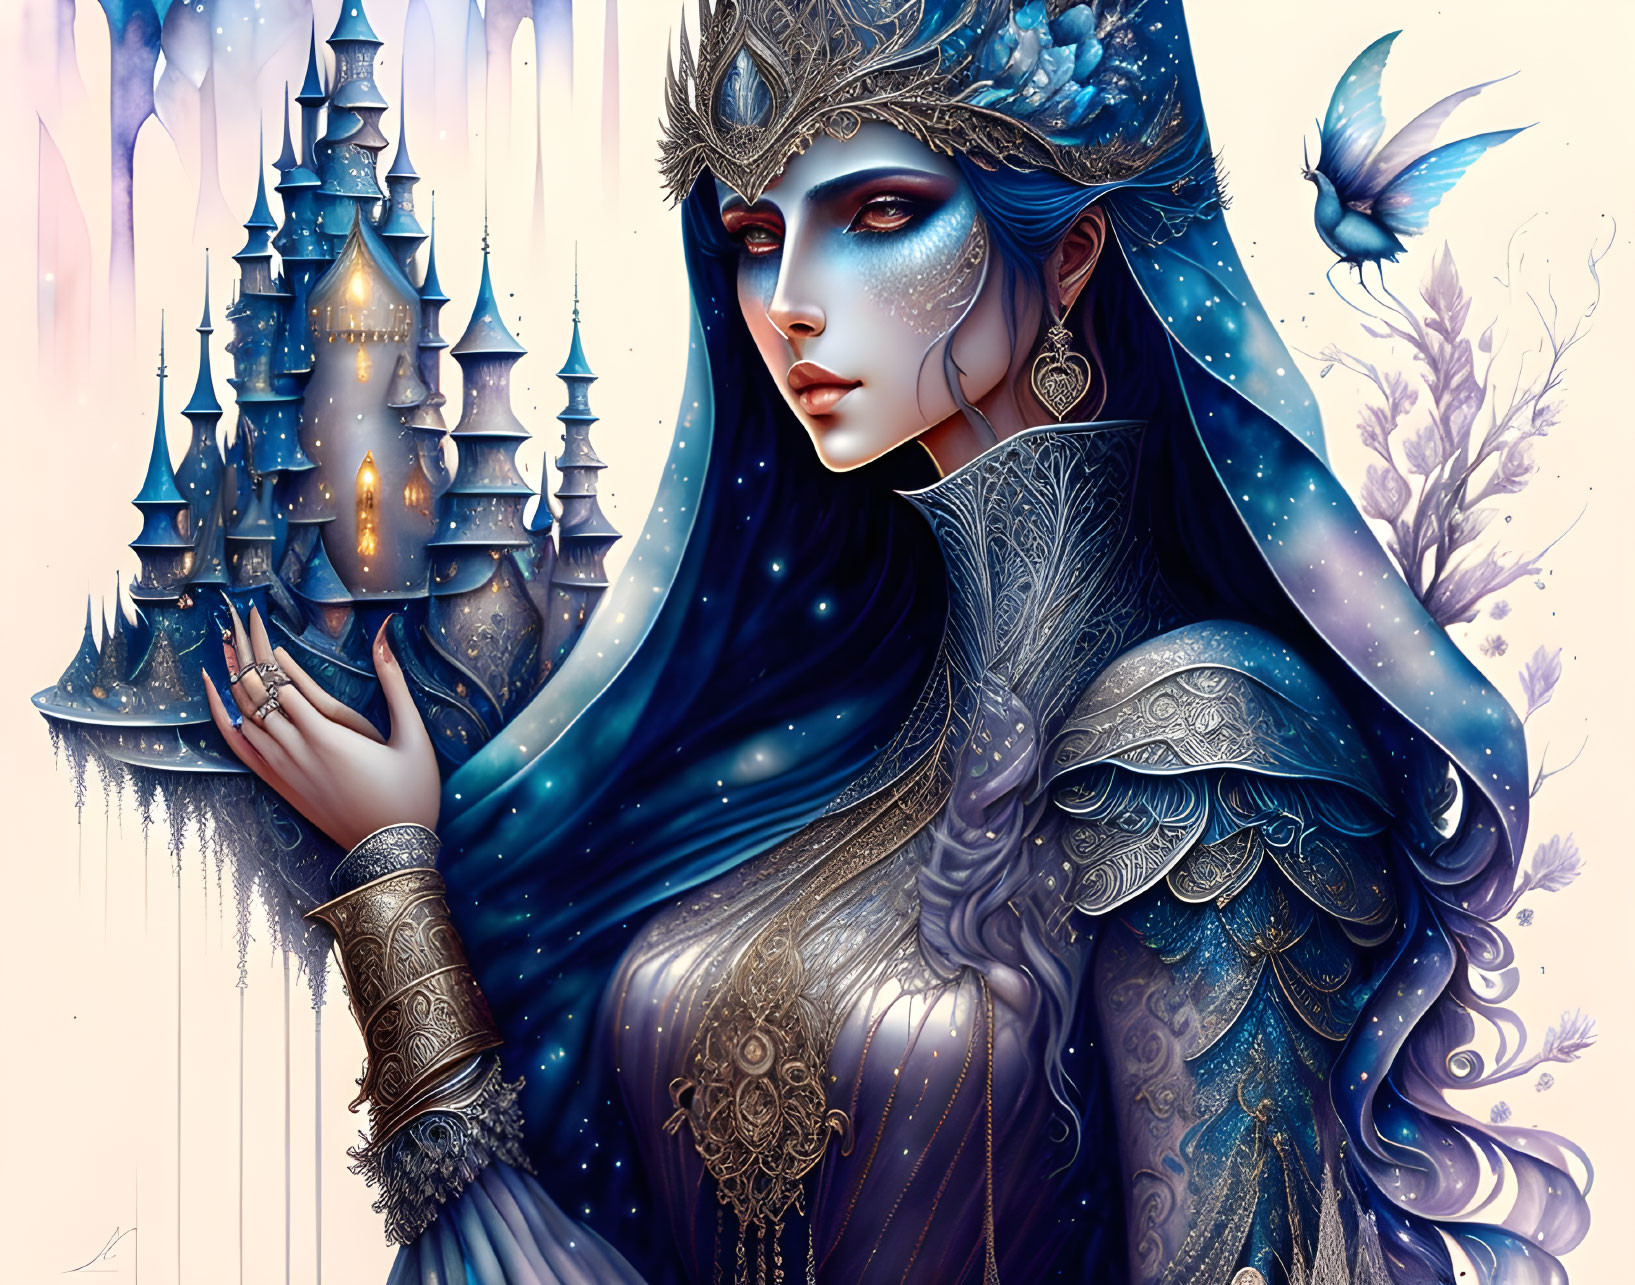 Fantasy-themed illustration of a woman with castle and butterflies